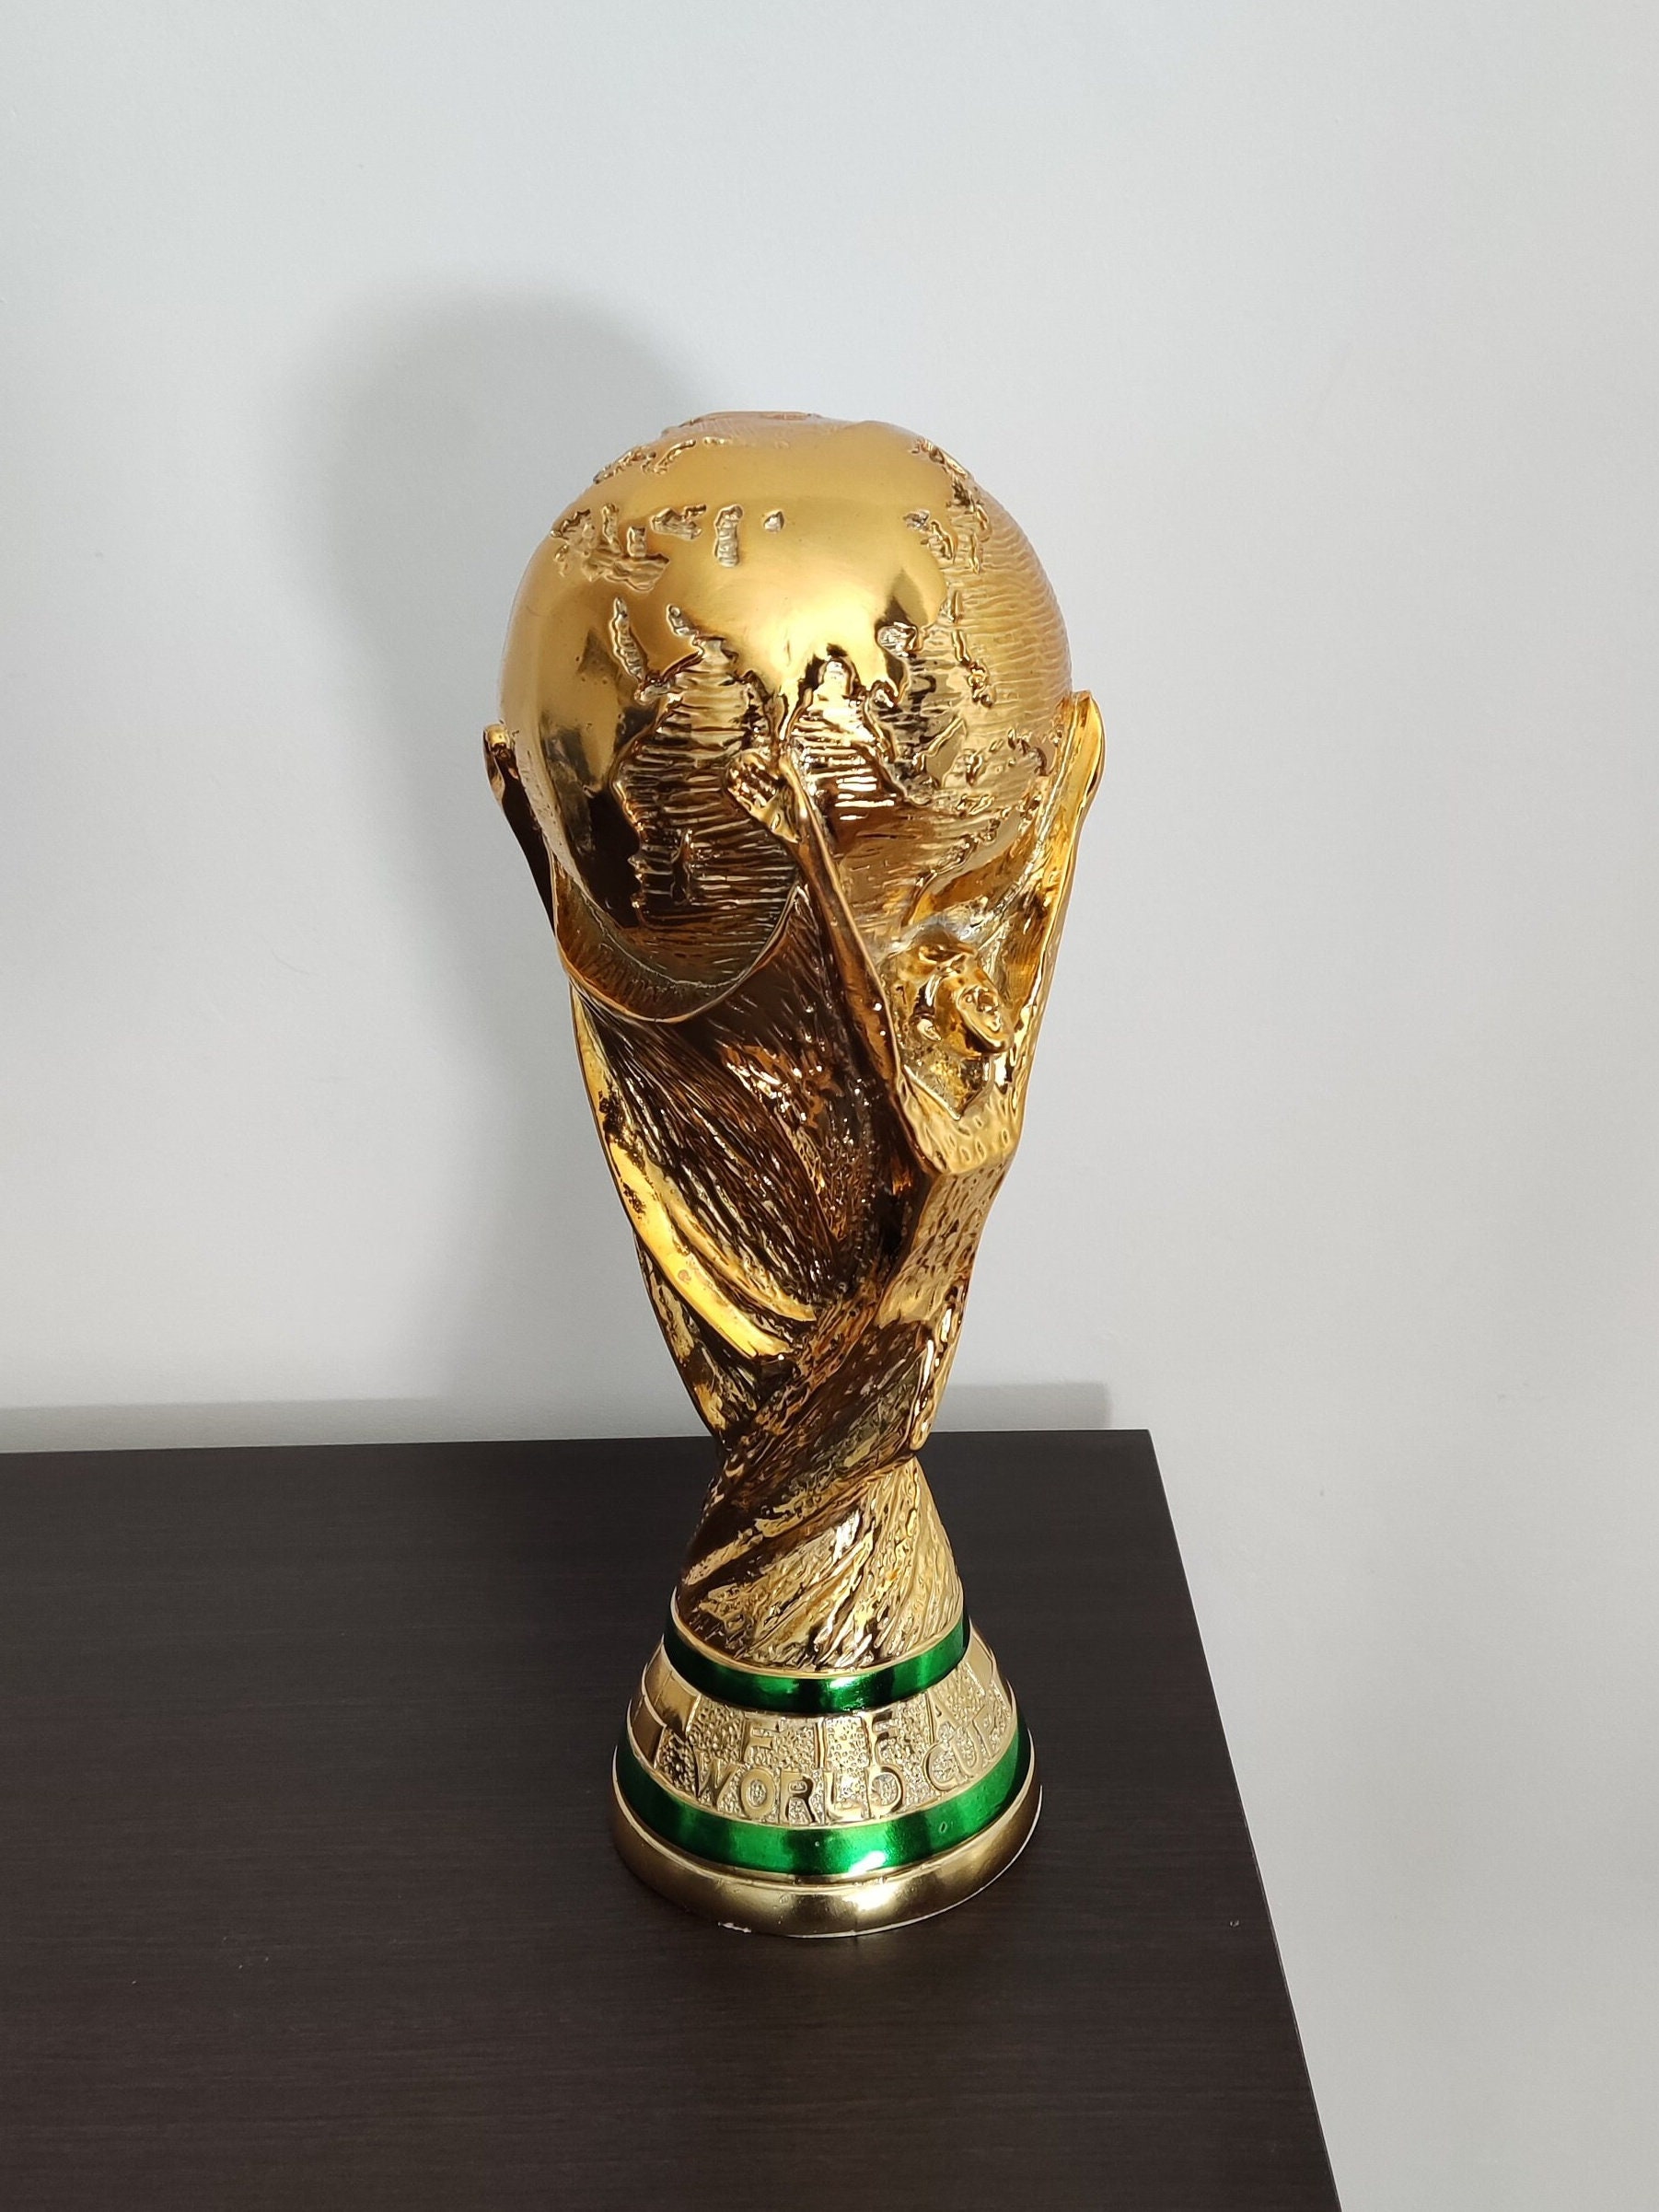 Replica soccer world cup trophy